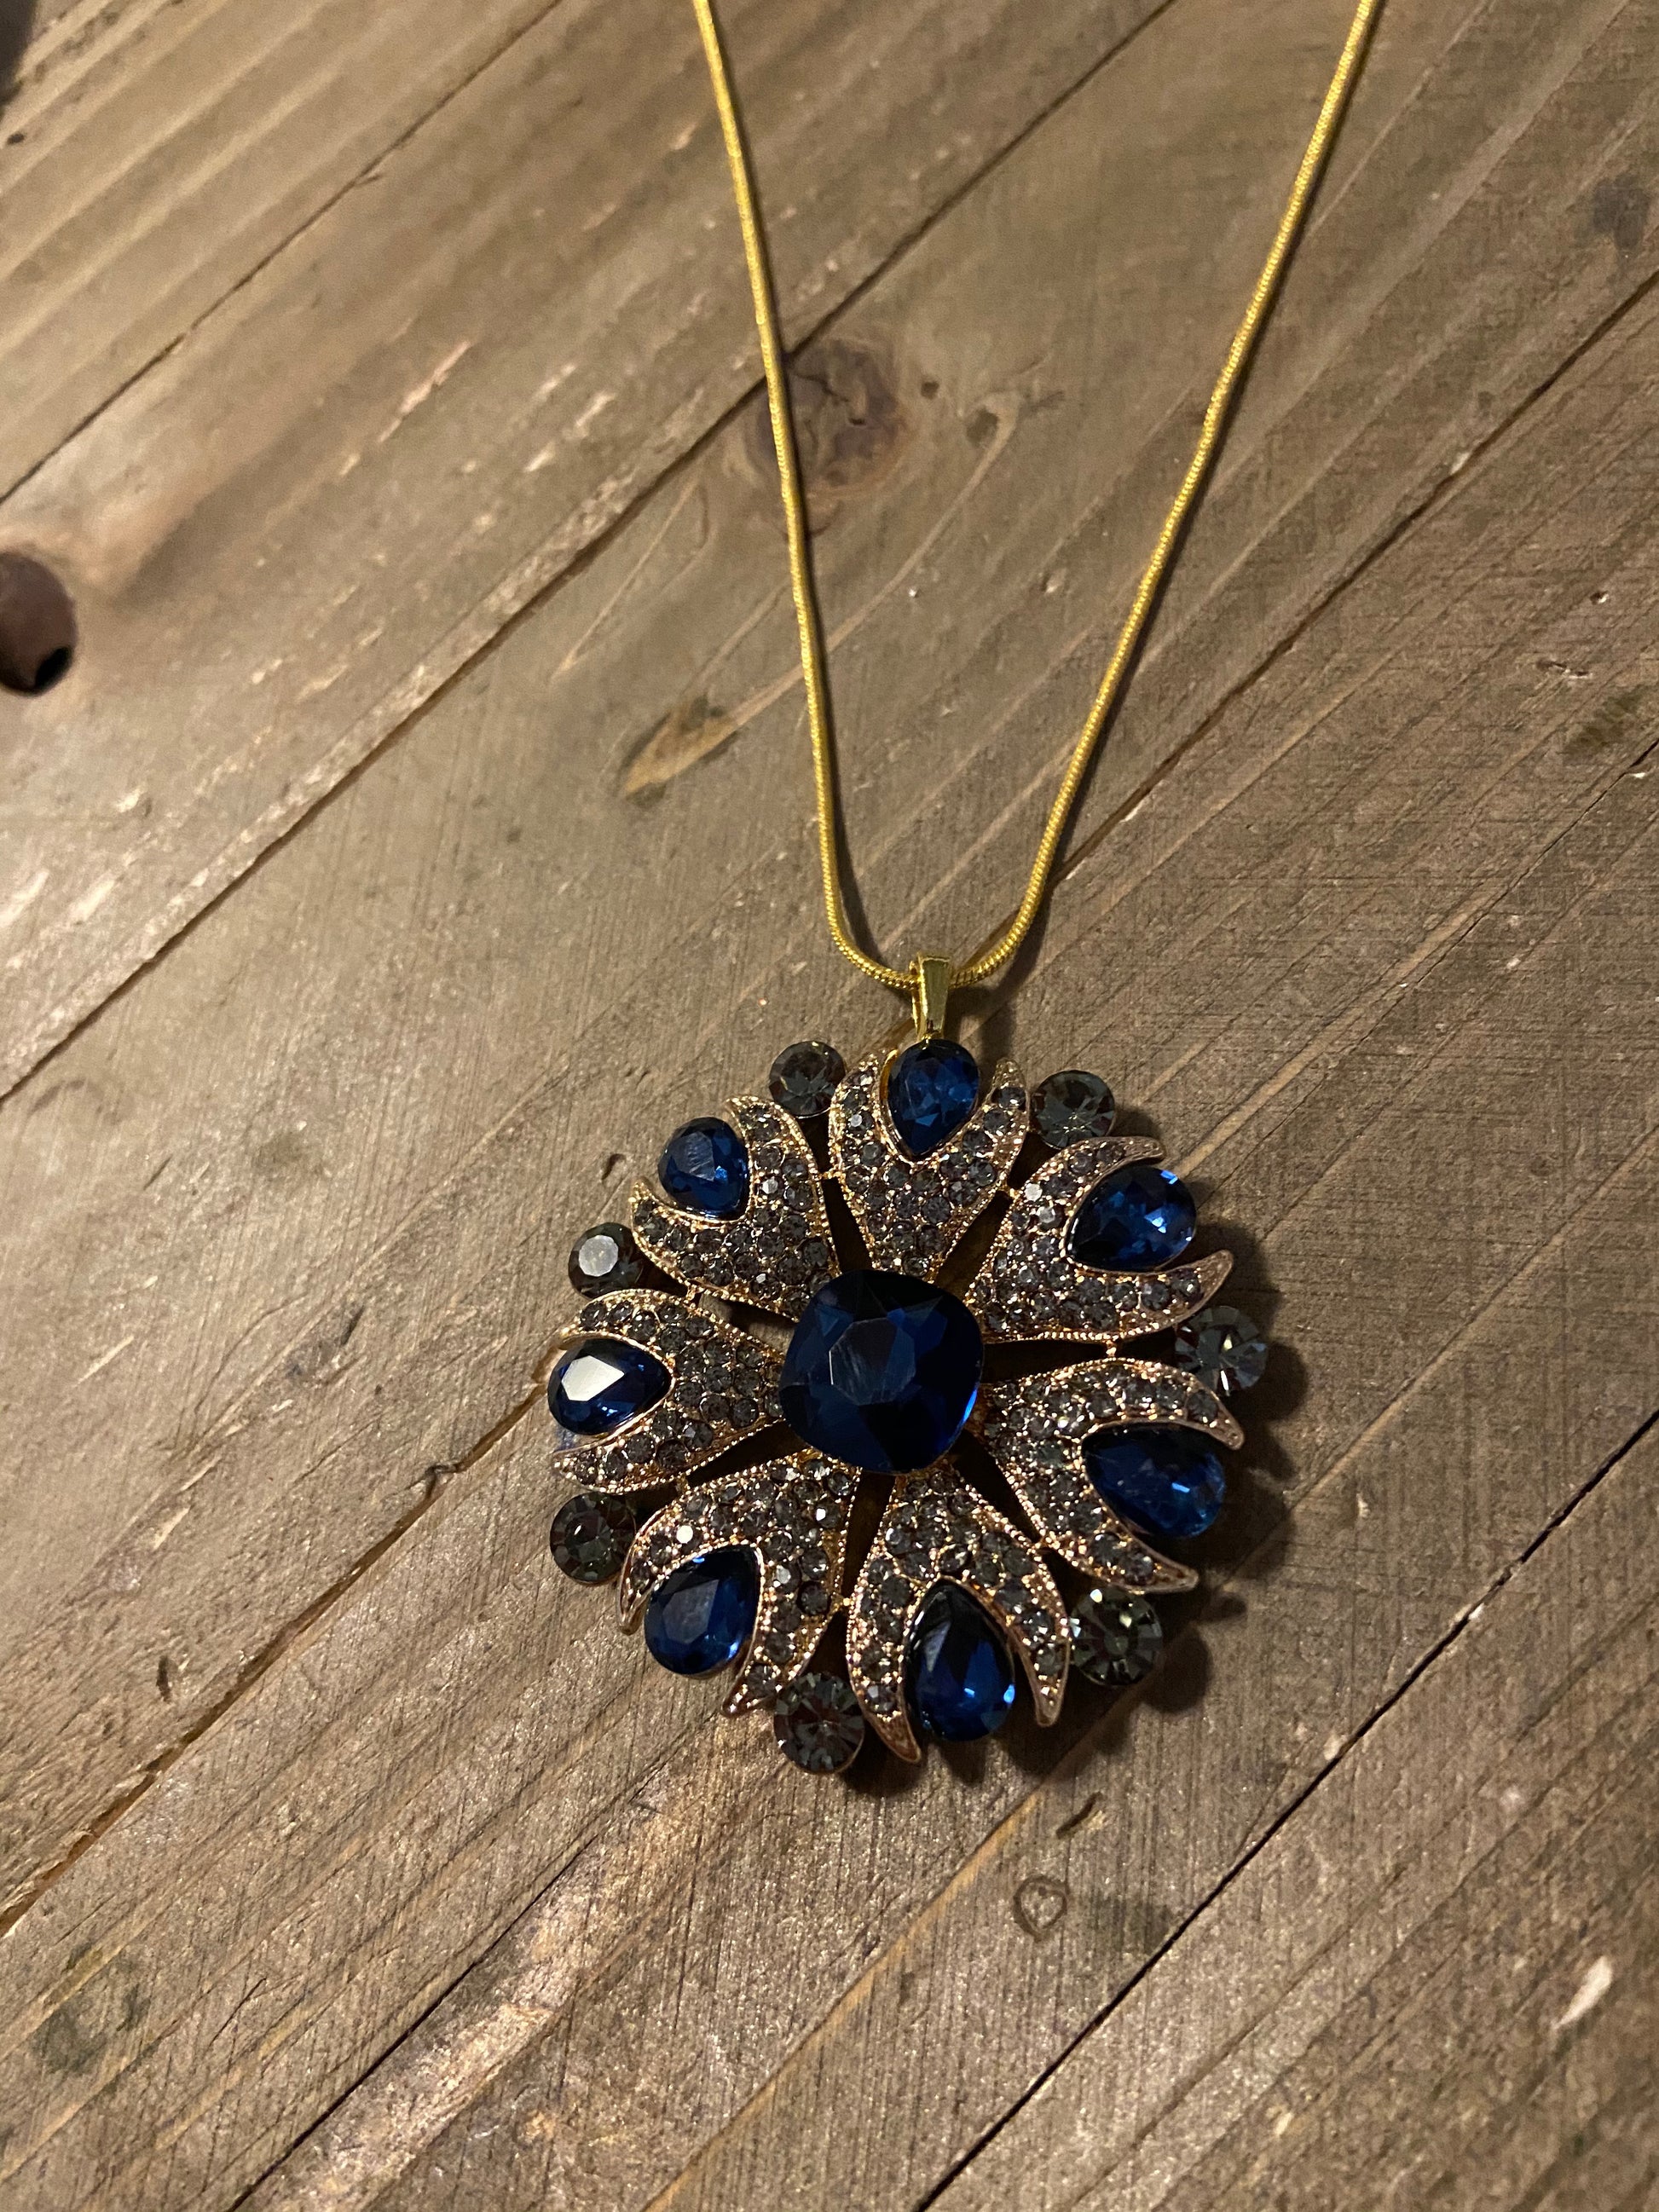 Glittering Shine GOLD CHAIN NECKLACE with A BEAUTIFUL BLUE &amp; GOLD RHINESTONE FLOWER-LIKE PENDANTPink tiful of LOVE